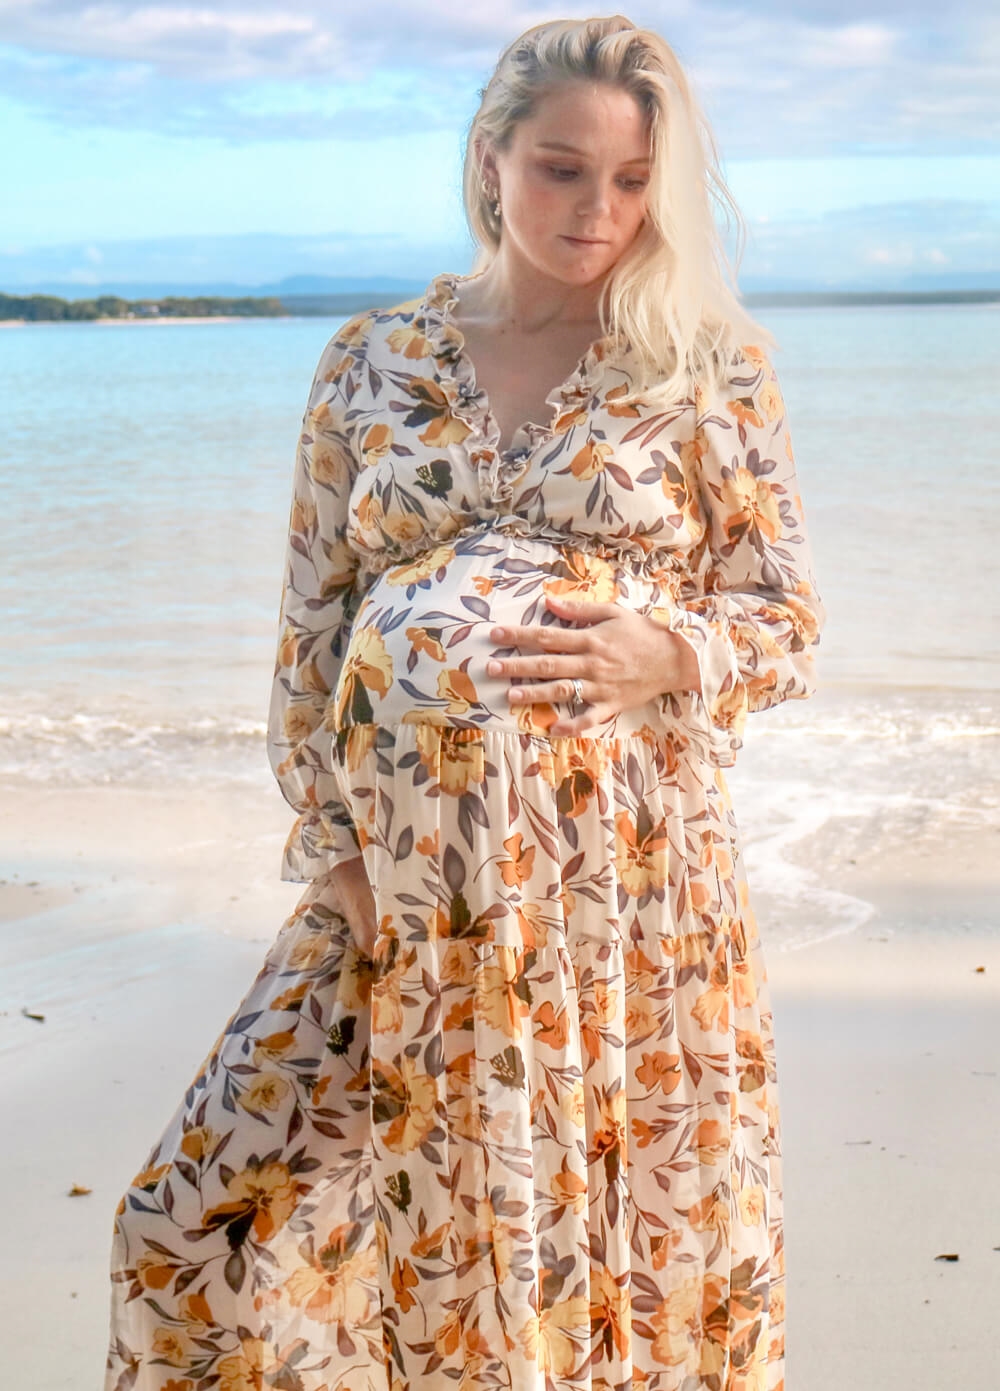 Lait & Co - Wanderlust Maternity Maxi Gown in Yellow Floral